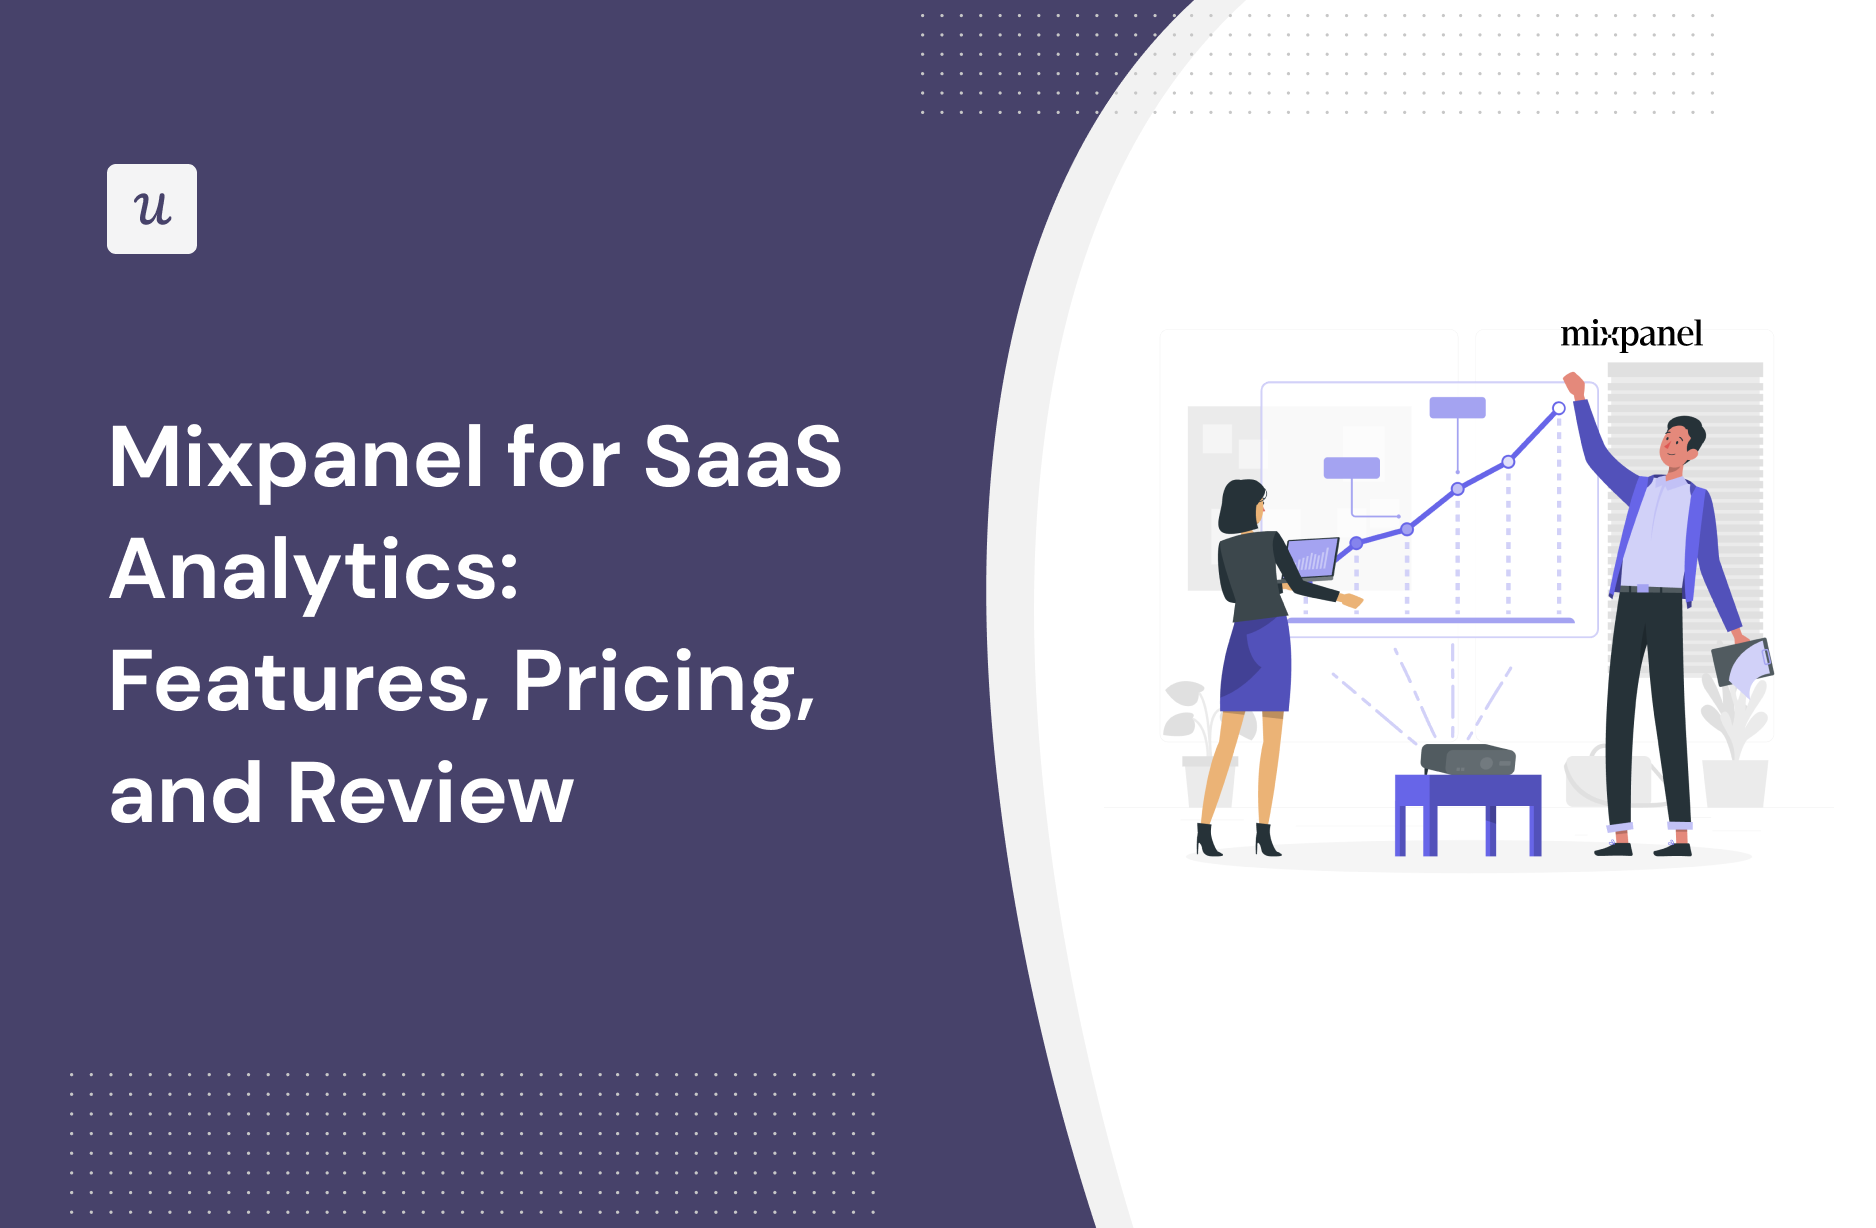 Mixpanel for SaaS Analytics: Features, Pricing, and Review